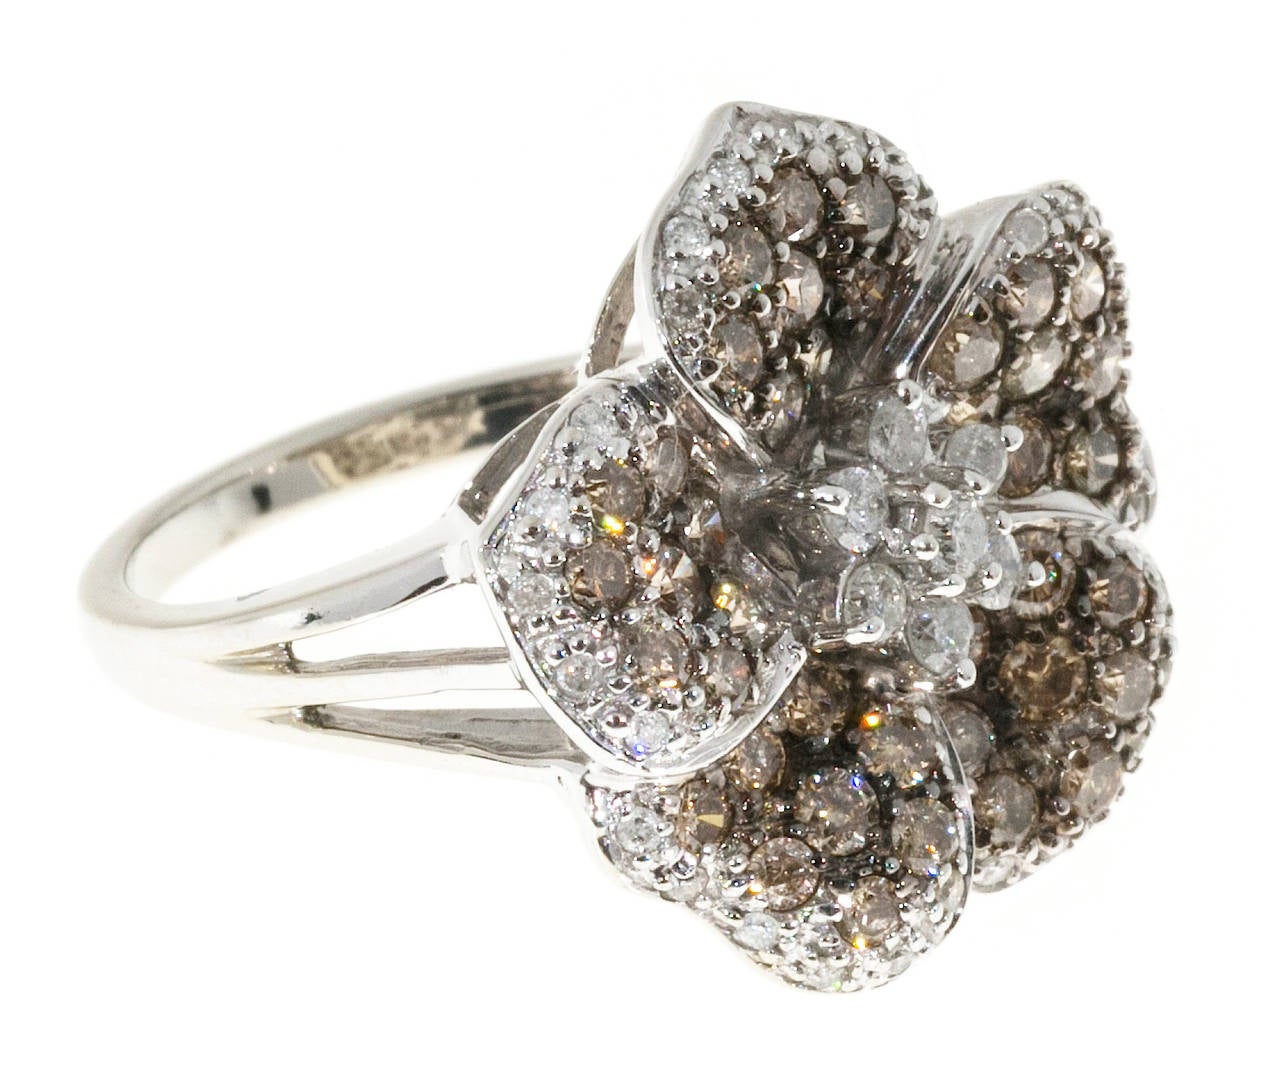 Beautiful 5 petal flower ring with golden yellow natural diamonds and white diamonds all full cut and sparkly.

7 full cut white diamonds approx. total weight .18cts, H, SI
40 full cut natural golden brown diamonds approx. total weight